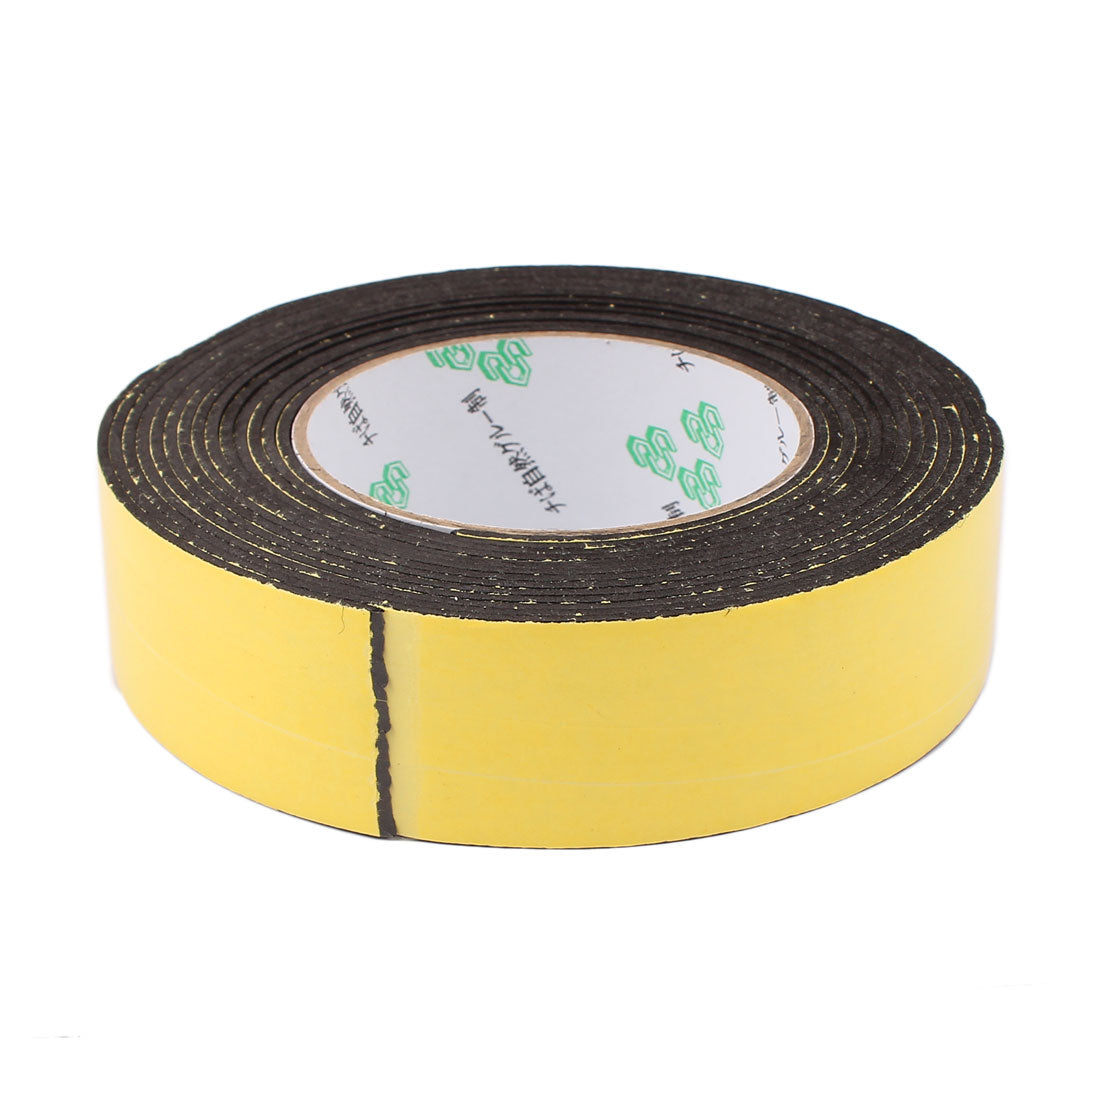 Uxcell Uxcell 35mm x 2mm Single Sided Self Adhesive Shockproof Sponge Foam Tape 5M Length